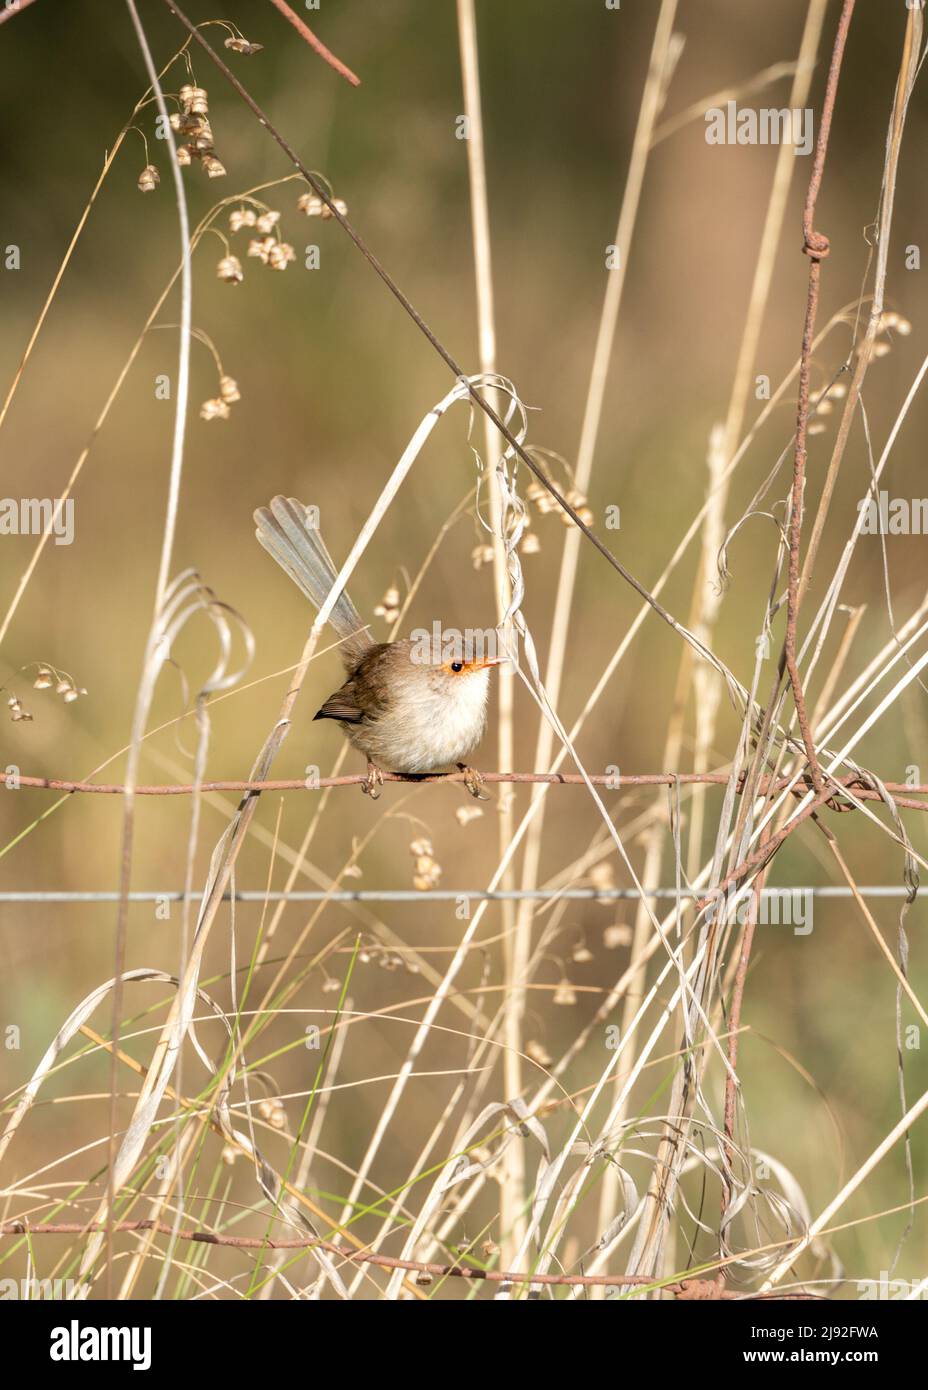 Delicate, light brown and white female wren perched on a rural wire fence surrounded by dry grasses Stock Photo